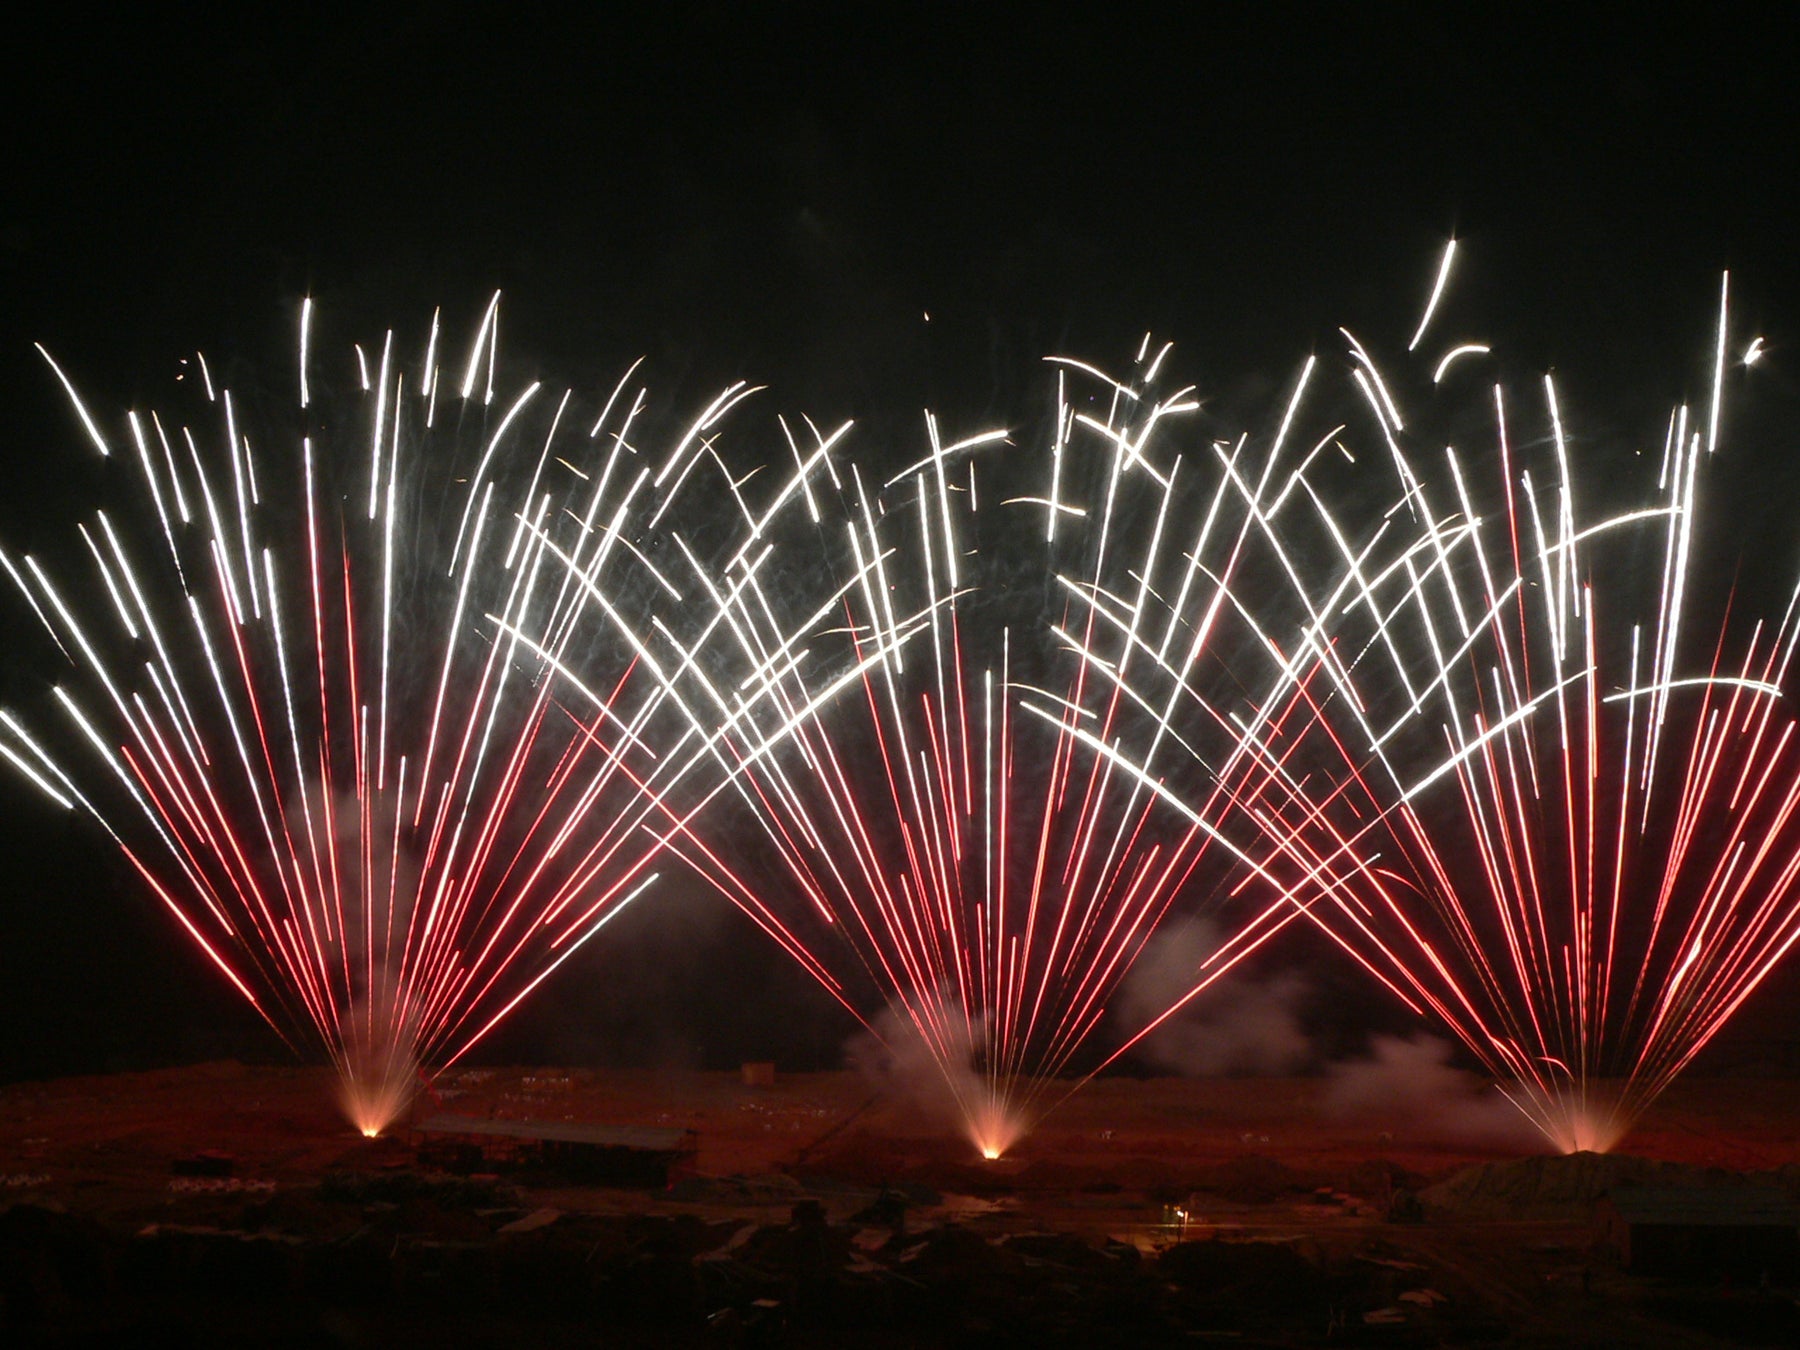 EXPLORING THE CULTURAL SIGNIFICANCE OF DIWALI AND ITS DAZZLING FIREWORKS